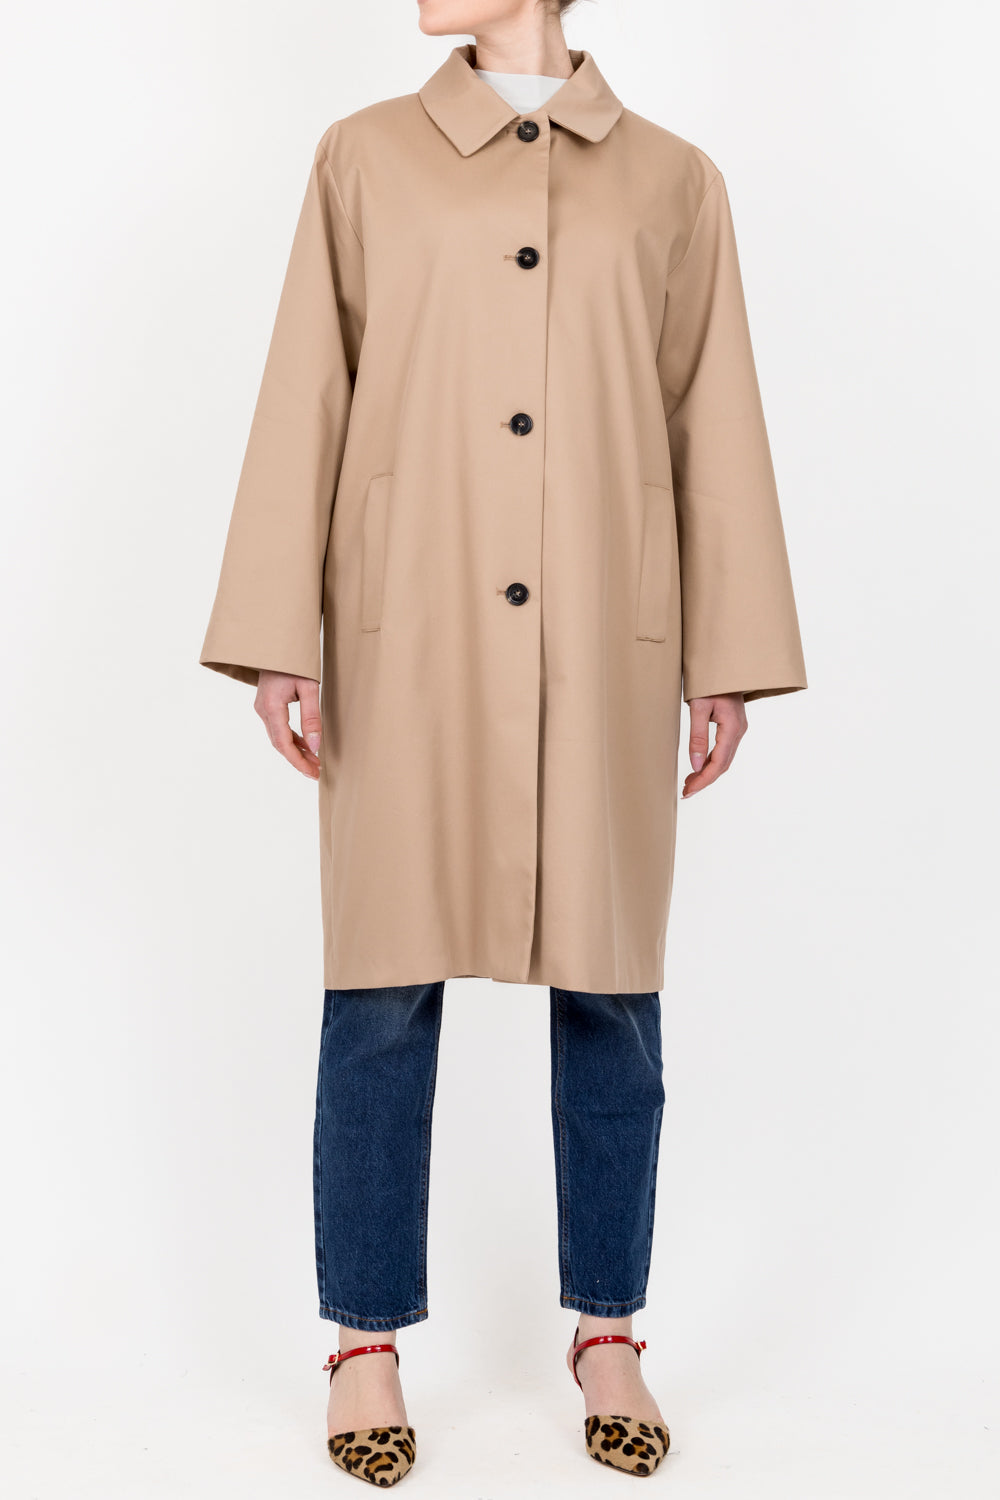 Imperial - Cappotto Trench lungo Art. KI45HLJ